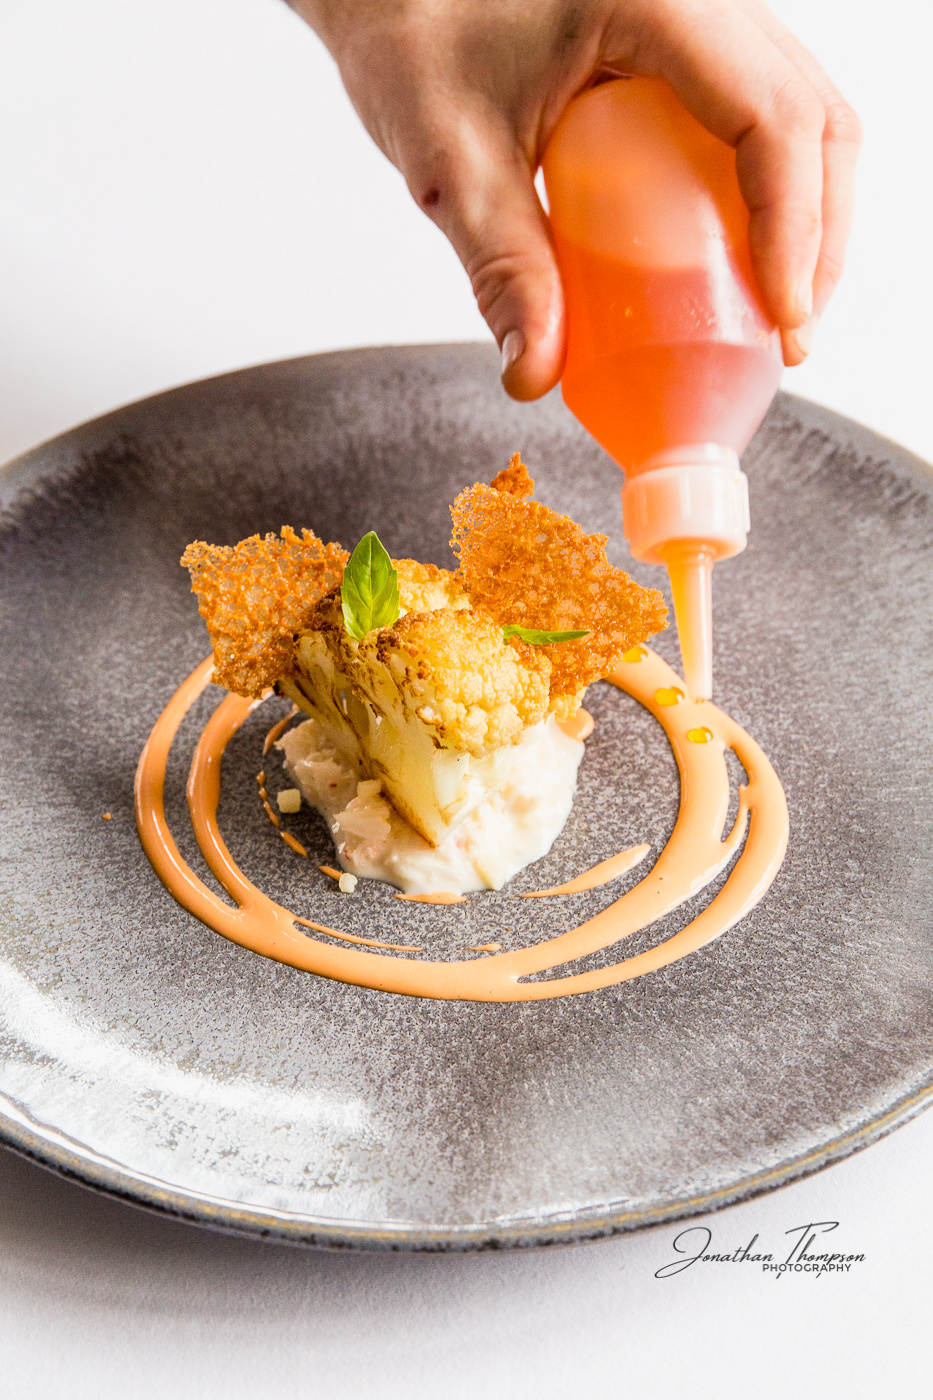 A squeezy bottle dropping small amounts of oil into a sauce. The plate is grey containing a cauliflower dish. Food design by chef Lee Westcott